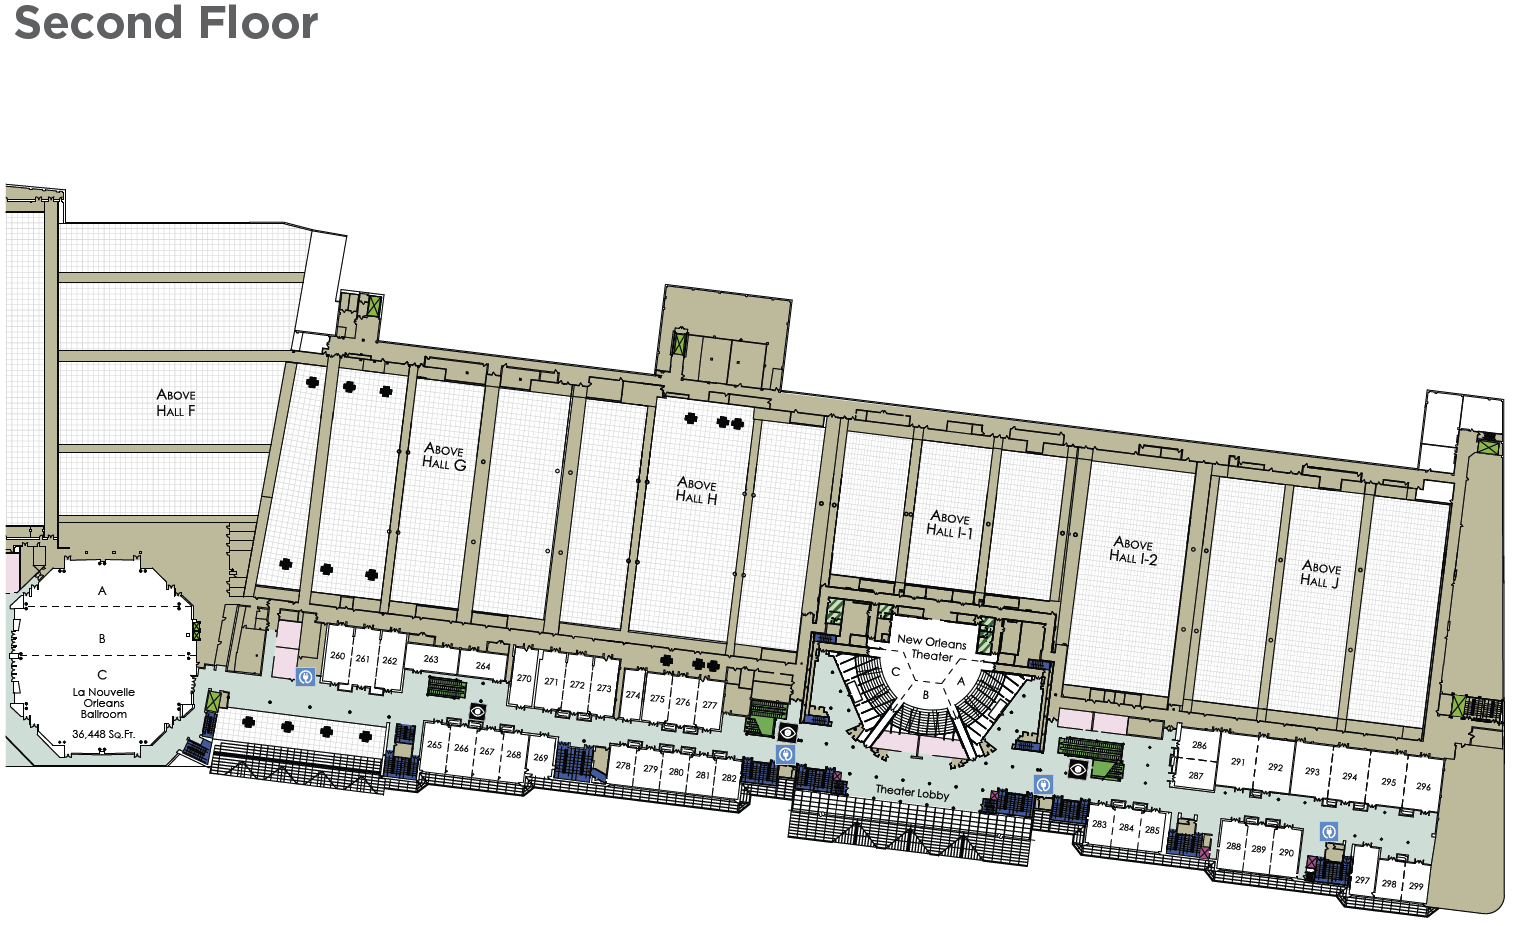 Second Floor Map of Morial Convention Center